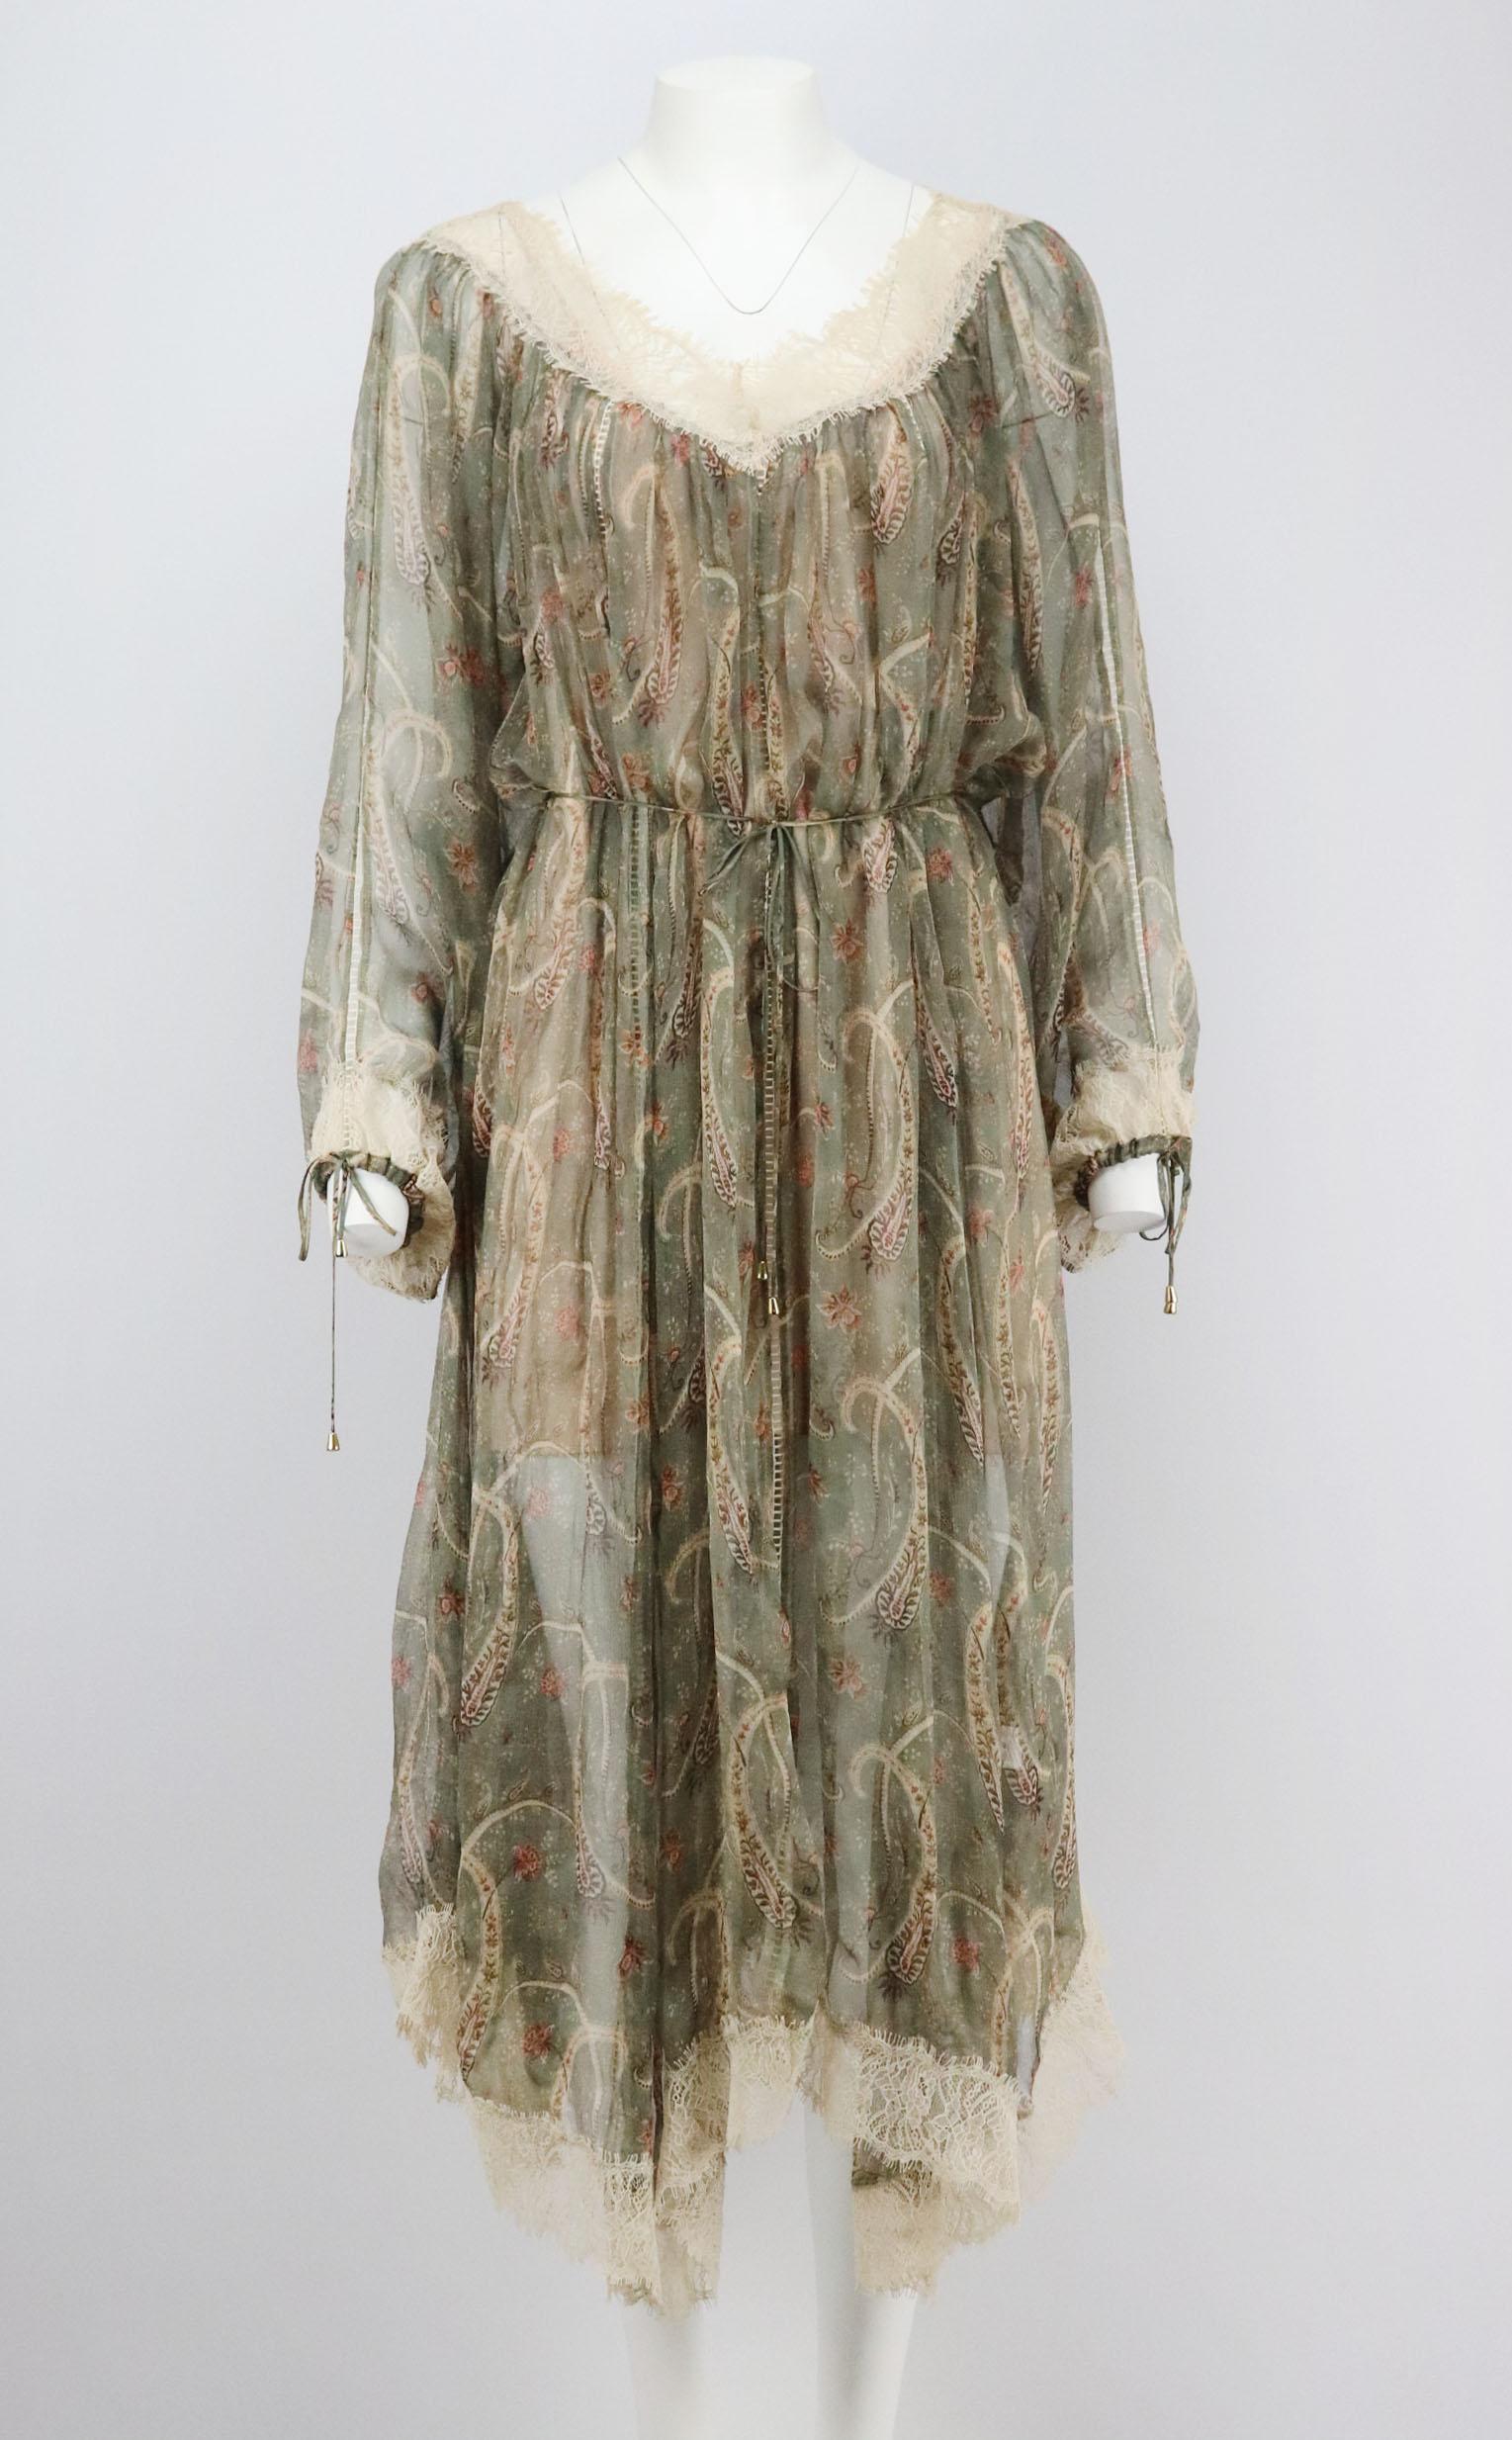 This Zimmermann midi dress is cut from semi-sheer silk-chiffon and has a paisley-print throughout, decorated with romantic lace trim along the neckline and hem, it has a long tie to cinch your waist and create volume in the silhouette.
Multicoloured